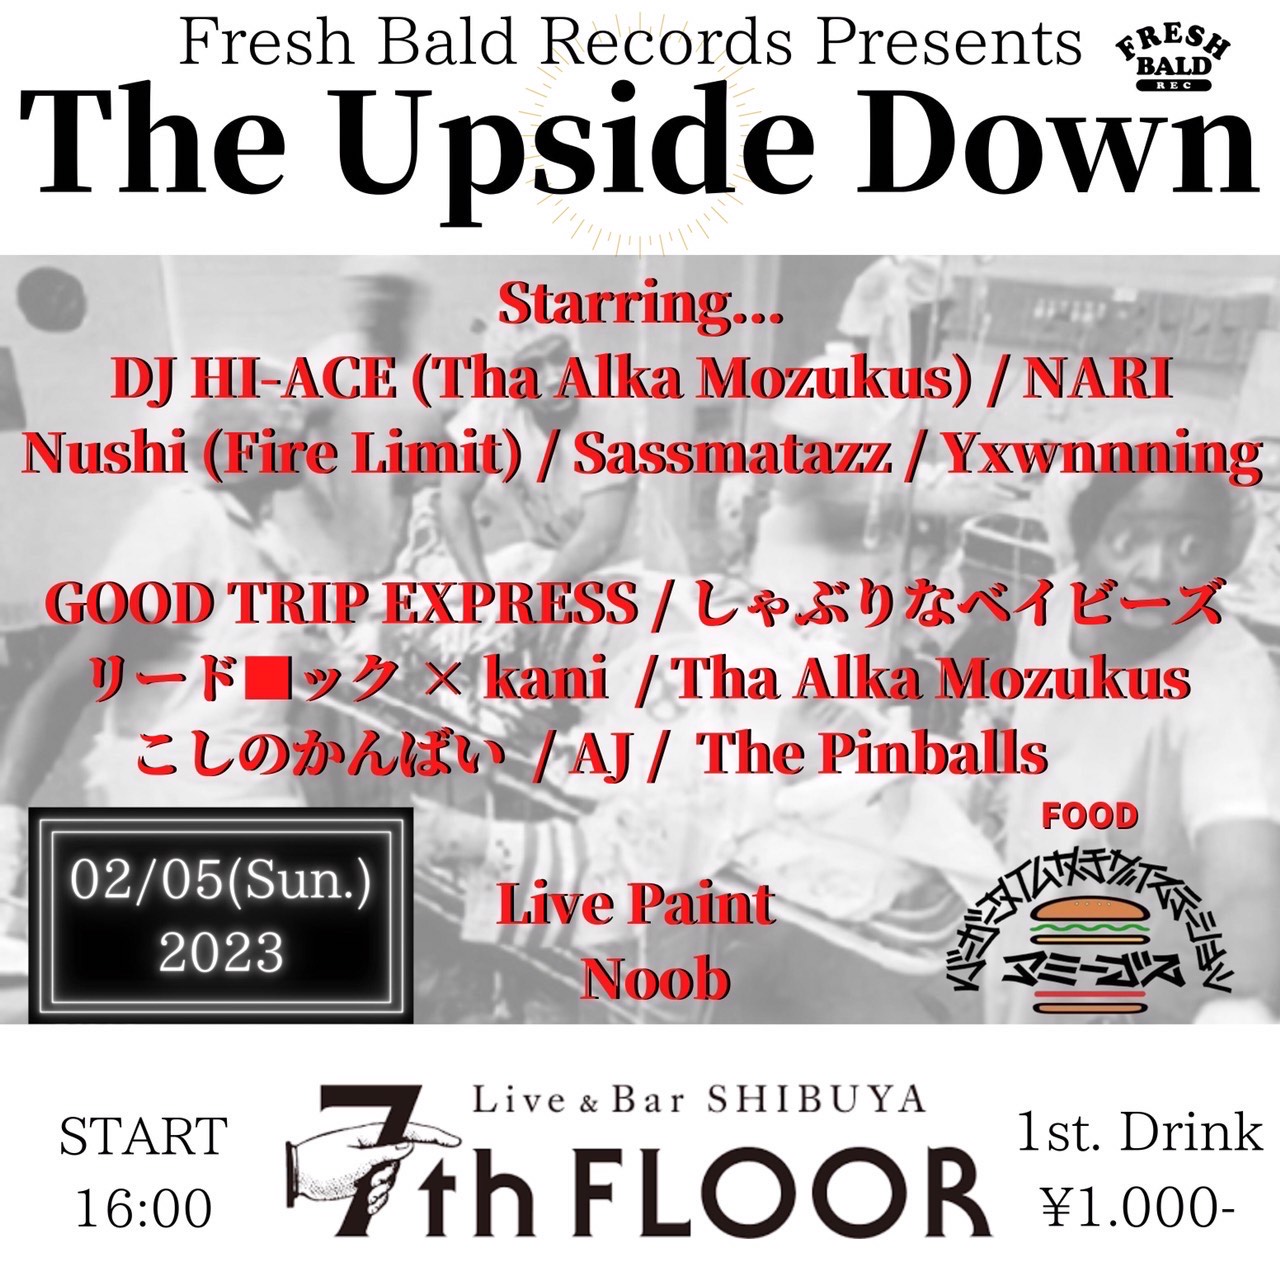 『The Upside Down』-Fresh Records Presents